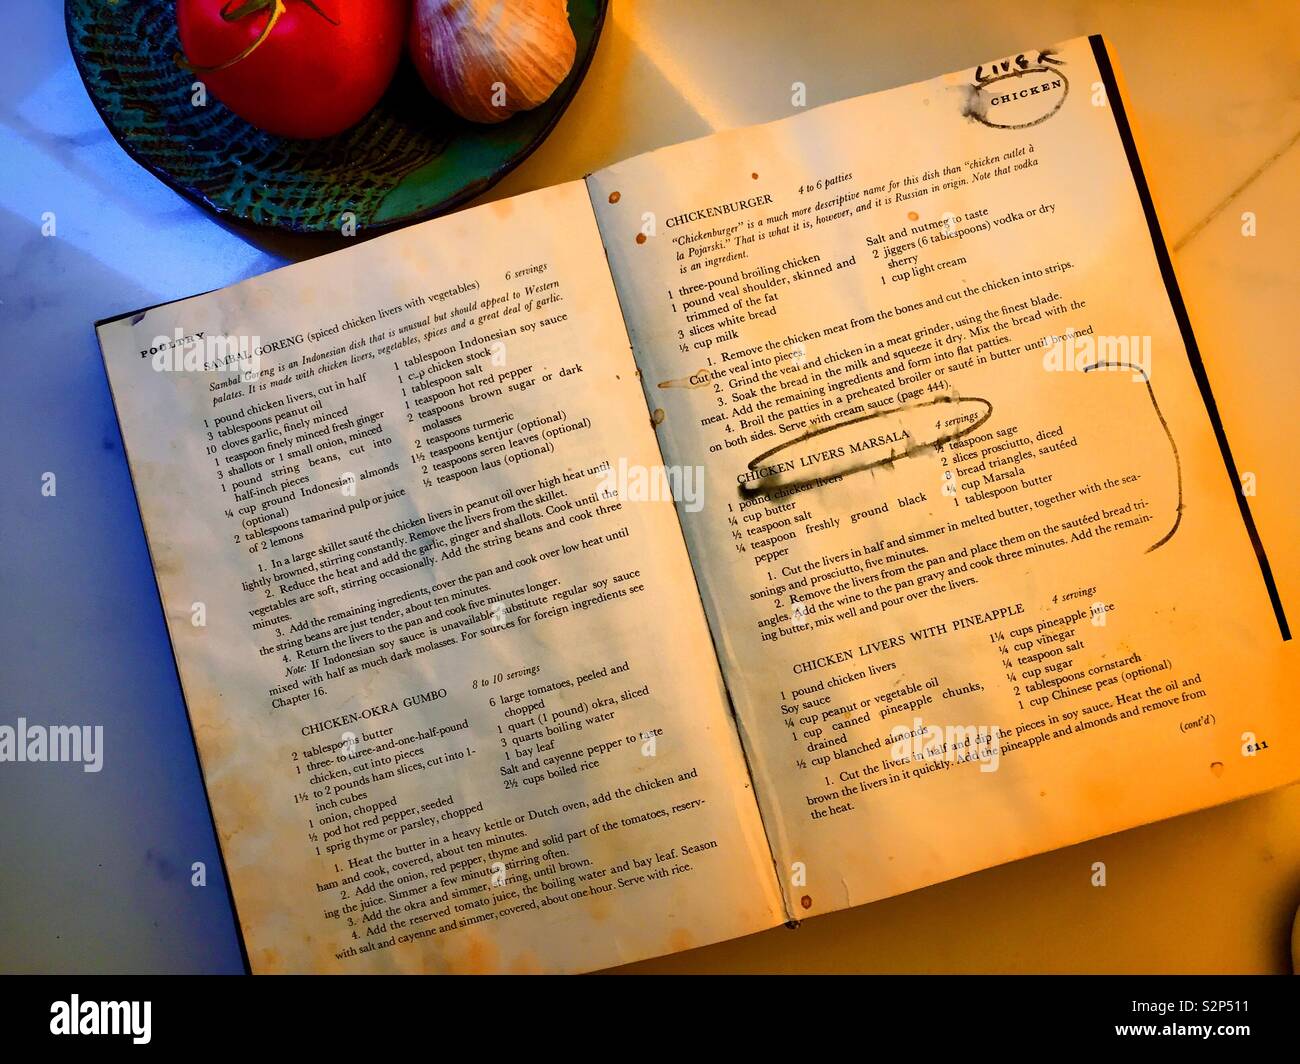 Well used and loved New York times cookbook open to a favorite recipe page, New York City, USA Stock Photo